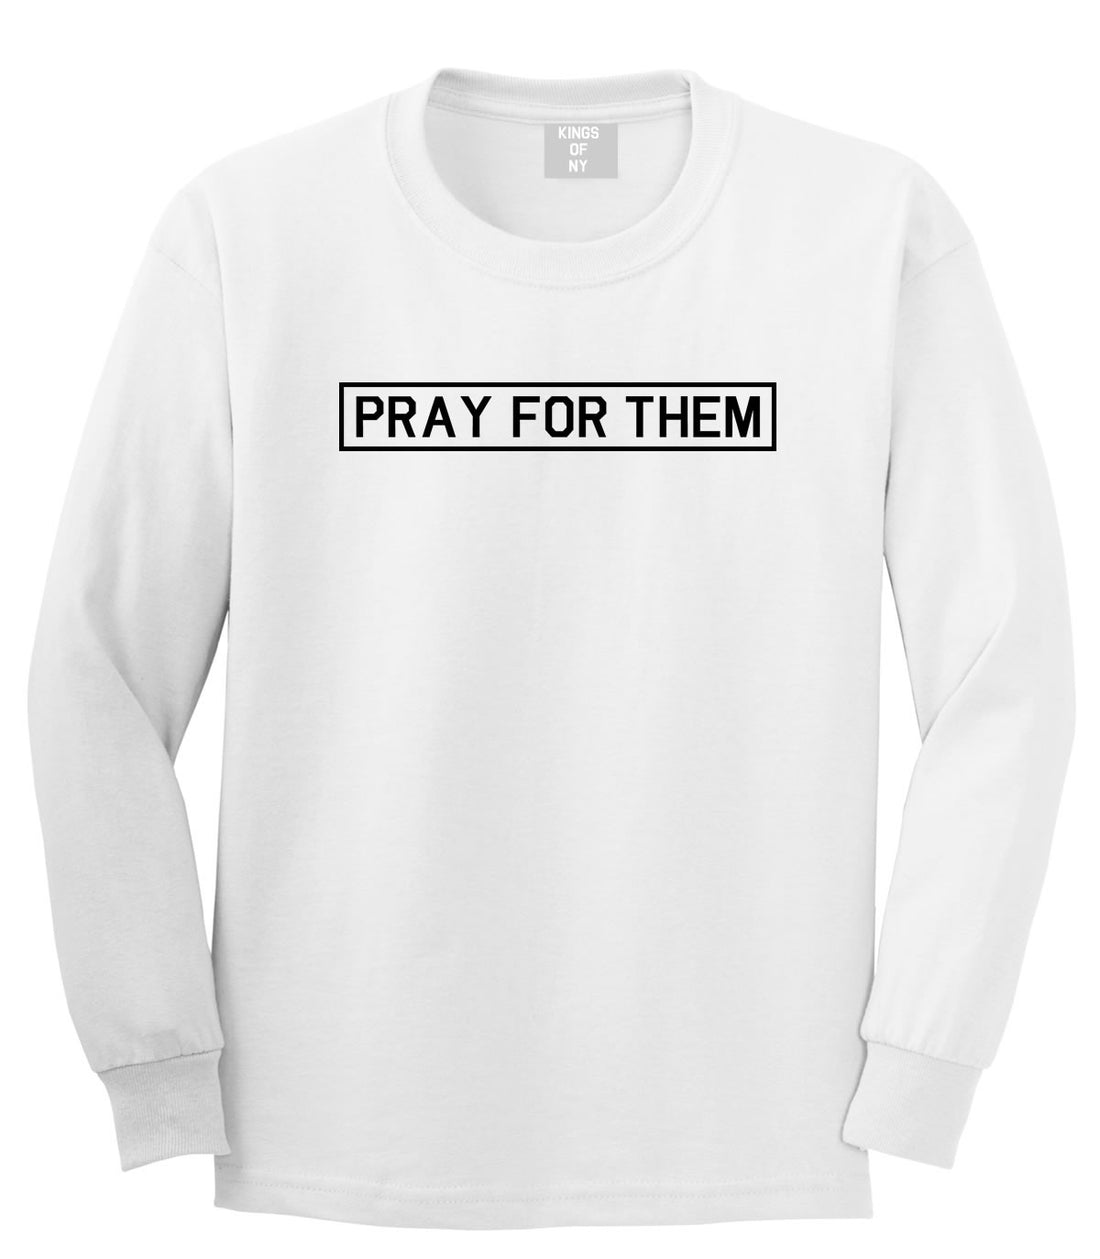 Pray For Them Fall15 Long Sleeve T-Shirt in White by Kings Of NY